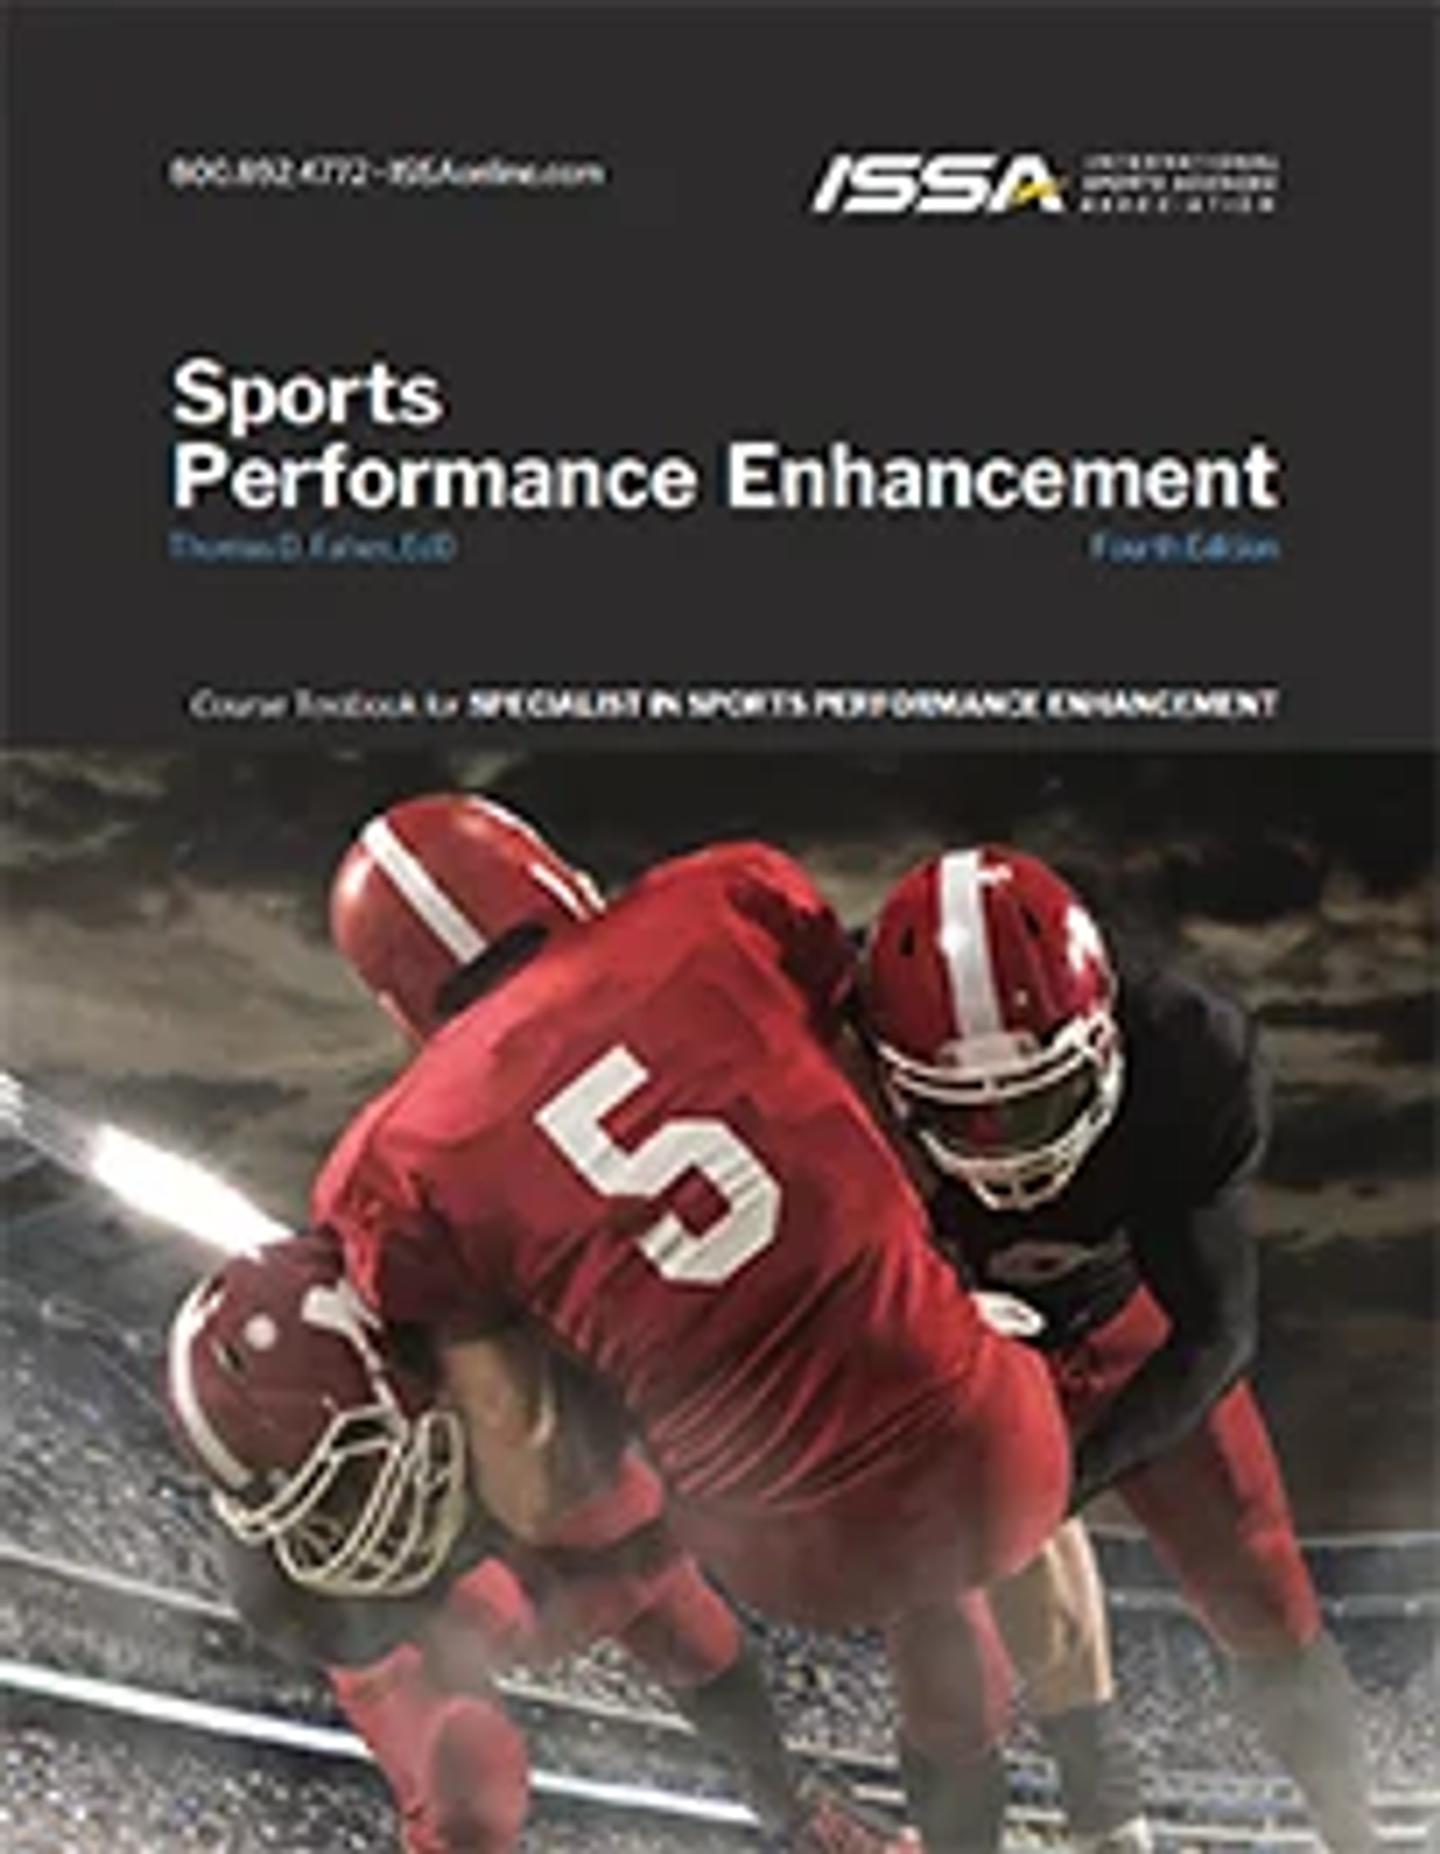 Performance Enhancement Book Cover Image